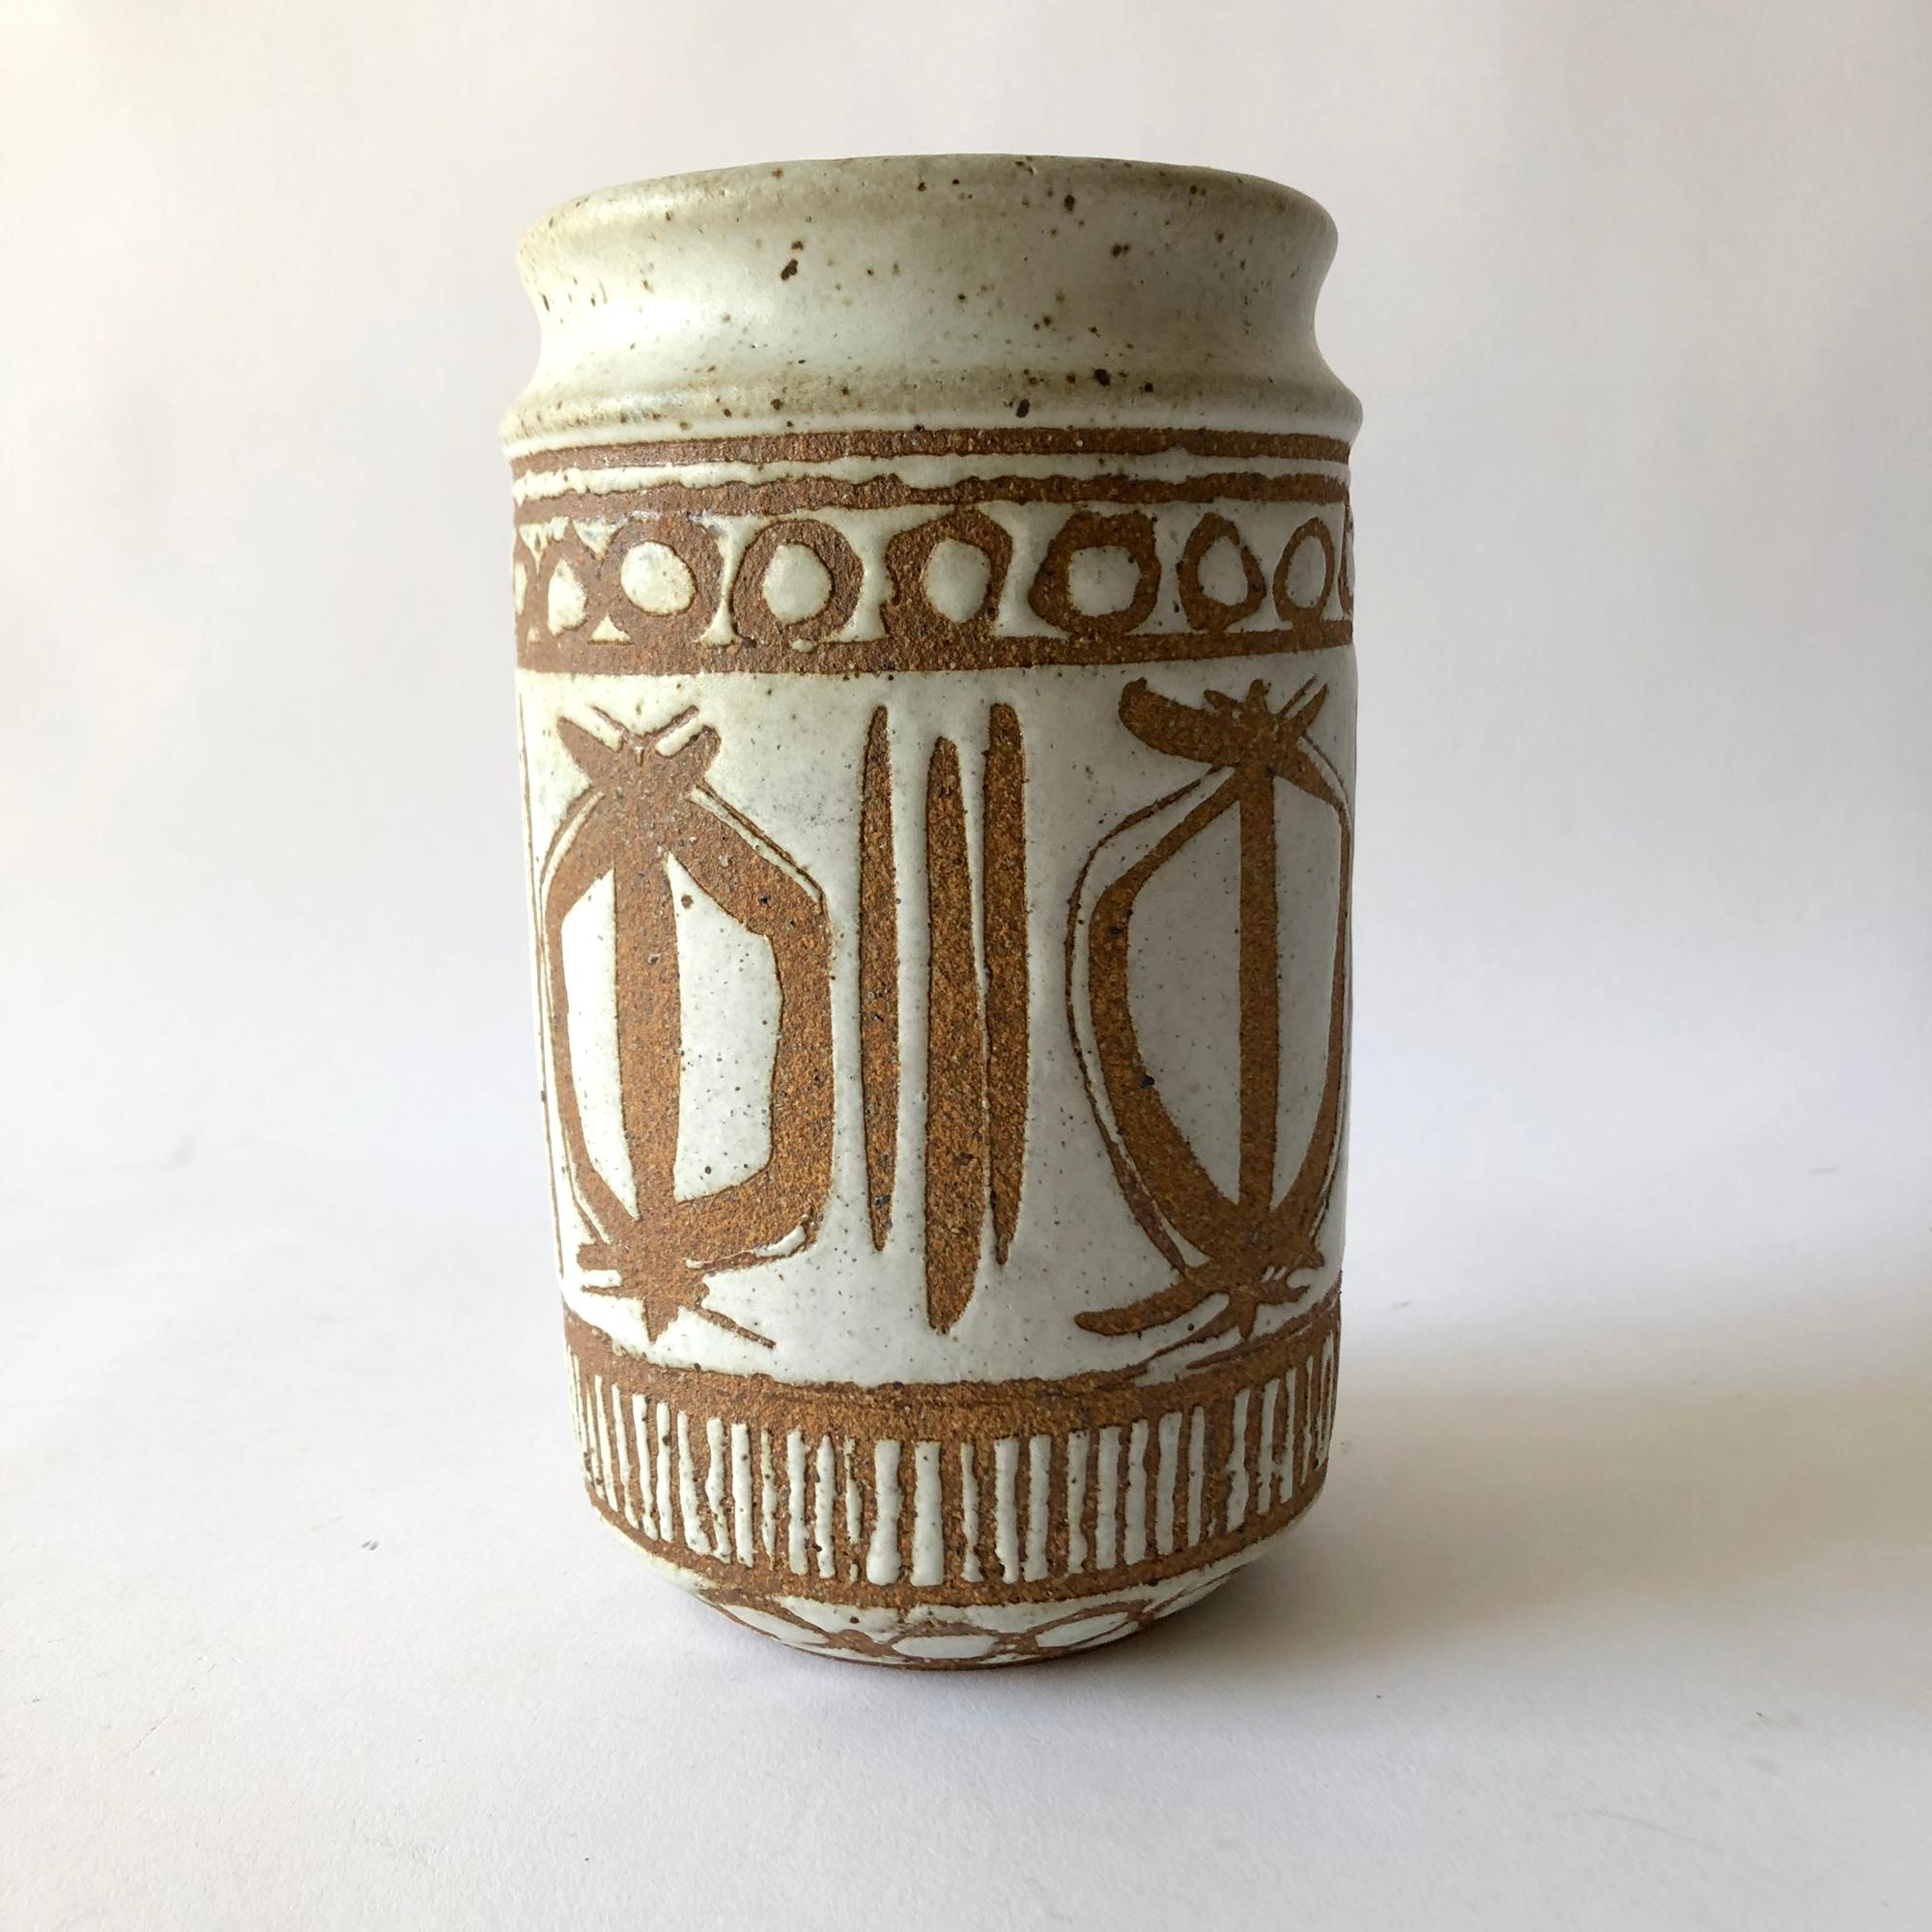 Stoneware pottery vase with wax resist decoration created by Vic Bracke of Bakersfield, California. 7